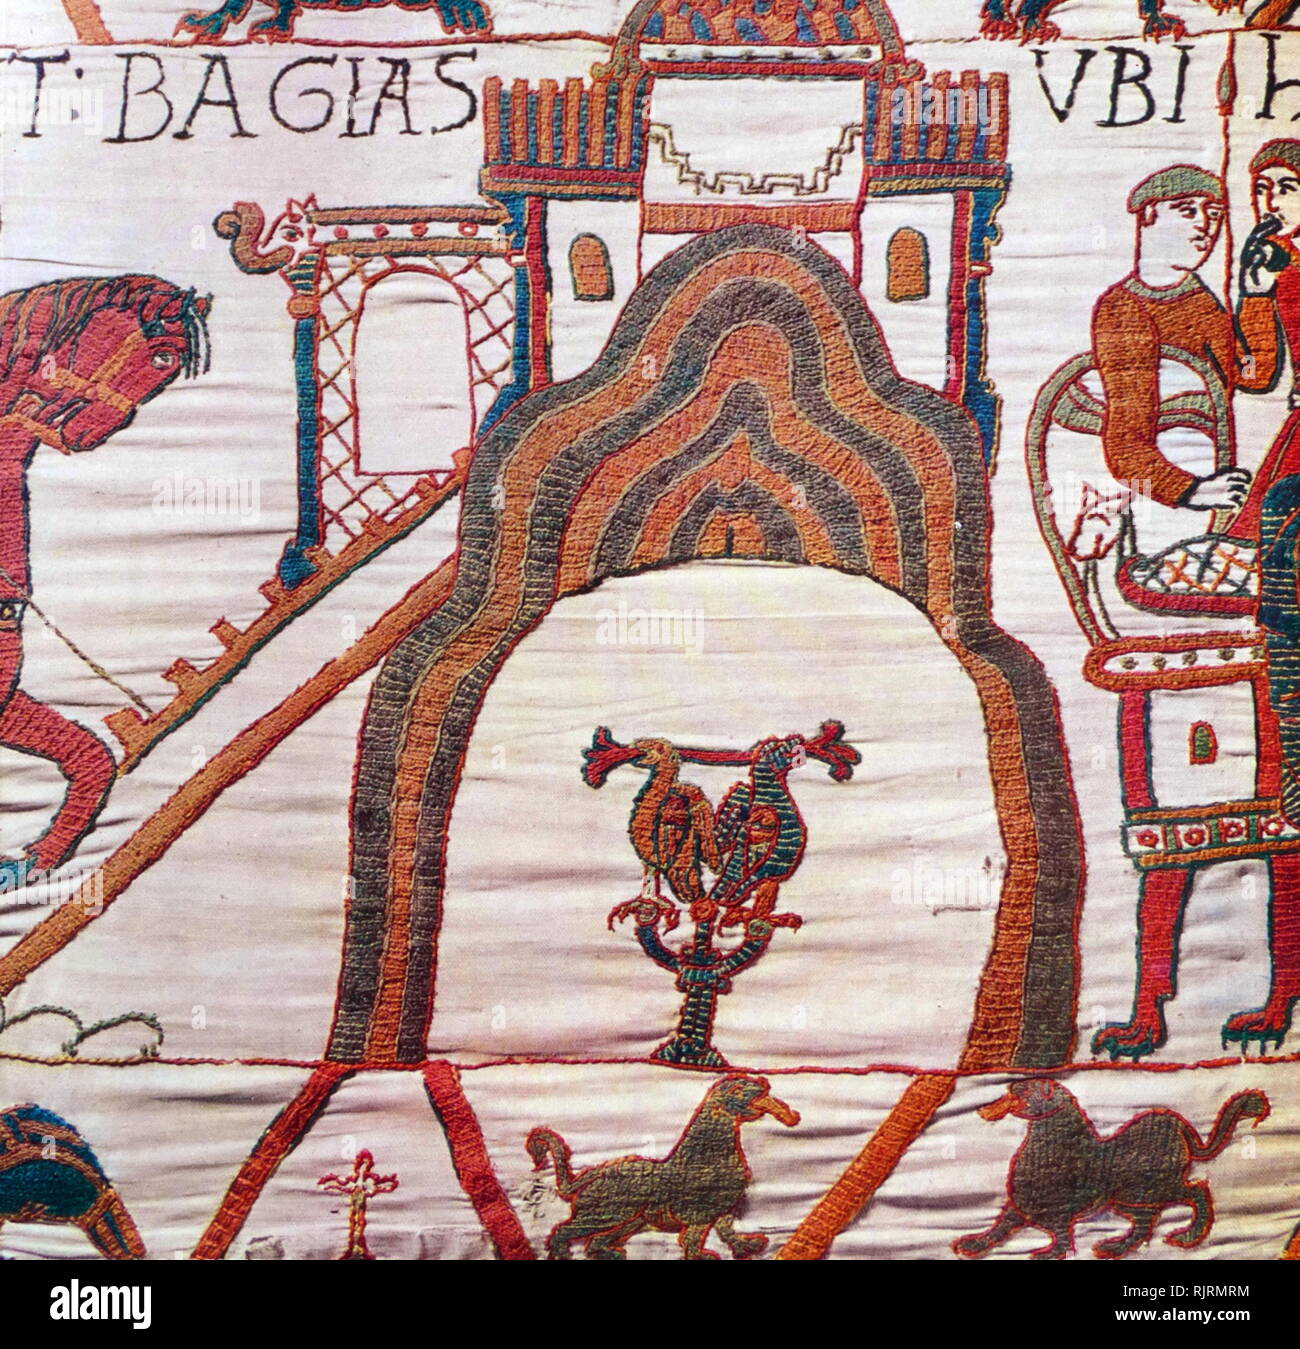 Episode from the Bayeux Tapestry, an embroidered cloth nearly 70 metres (230 ft) long, which depicts the events leading up to the Norman conquest of England, culminating in the Battle of Hastings, in 1066. It is thought to date to the 11th century, within a few years after the battle. It tells the story from the point of view of the conquering Normans. Stock Photo